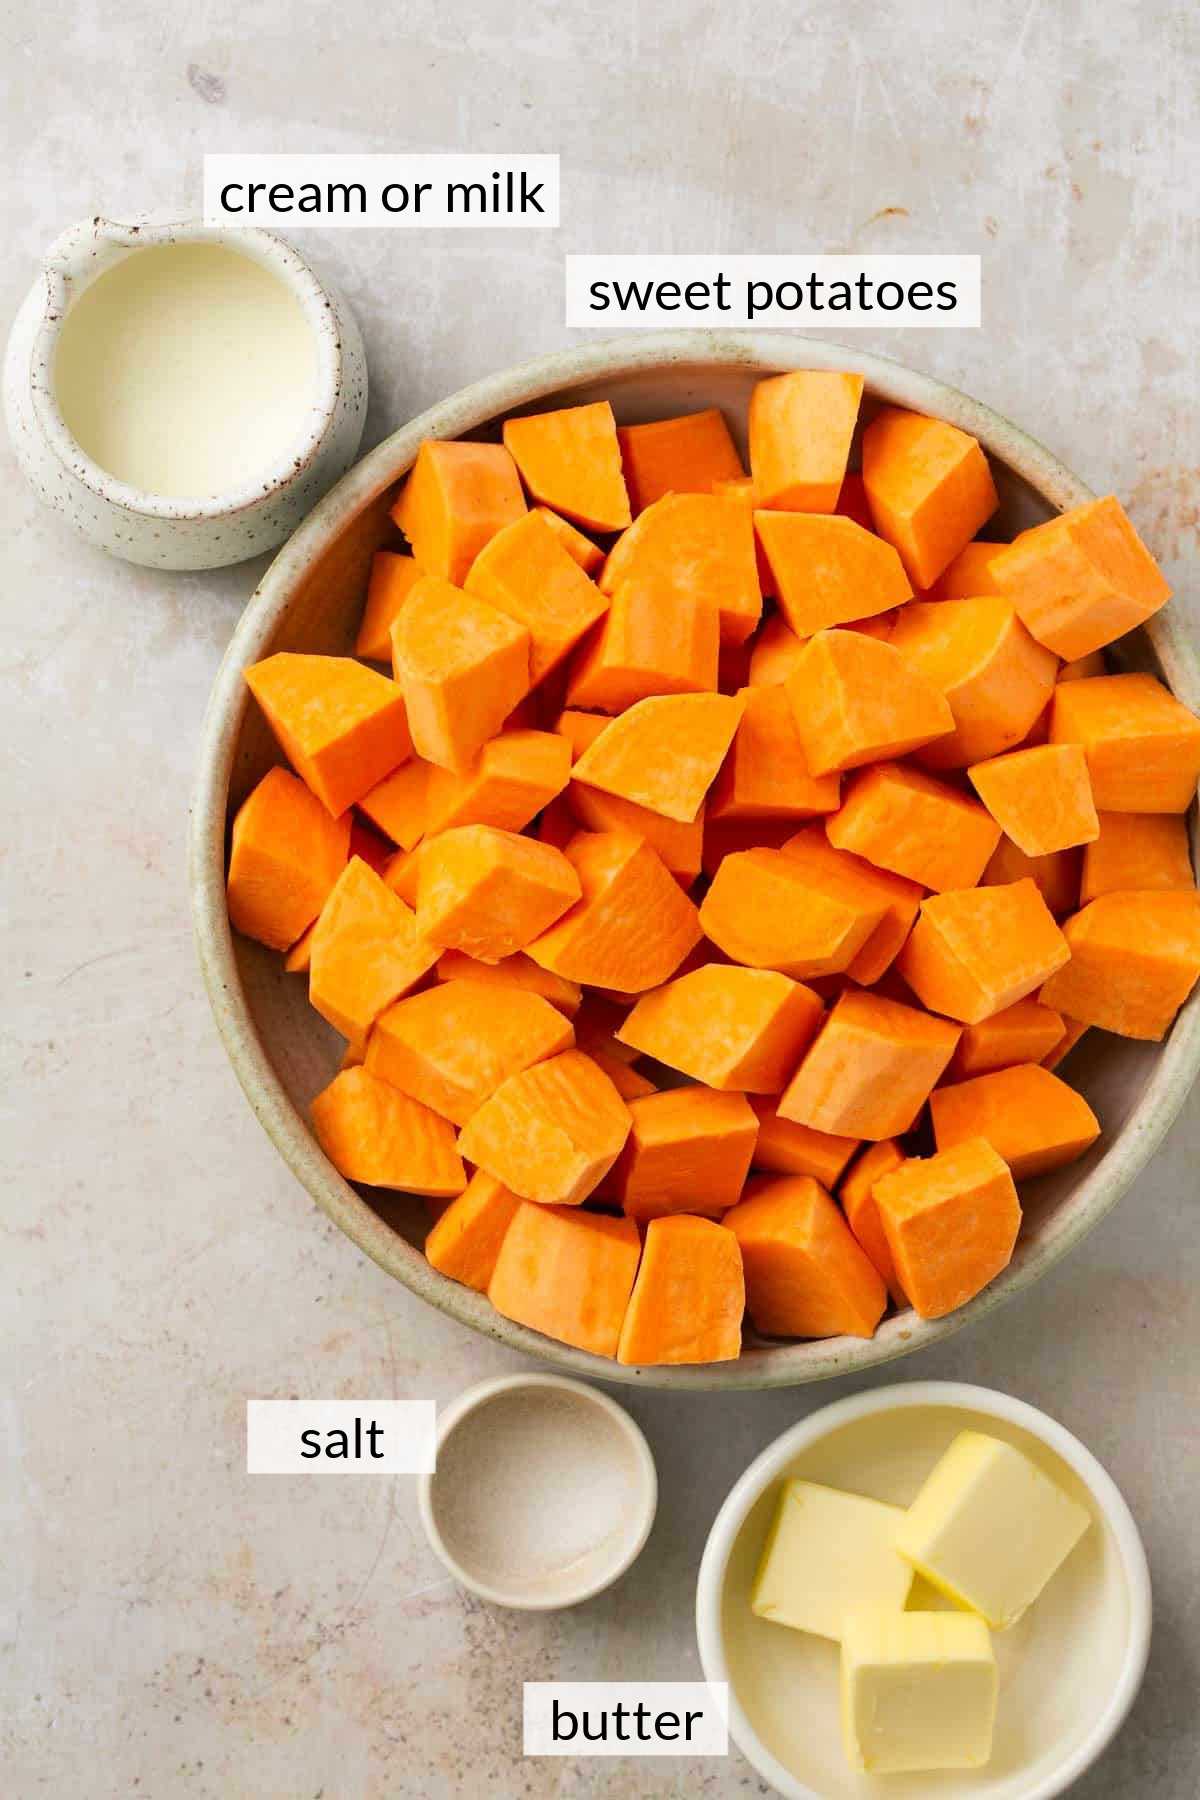 Cubed sweet potato in a bowl near cream and butter.